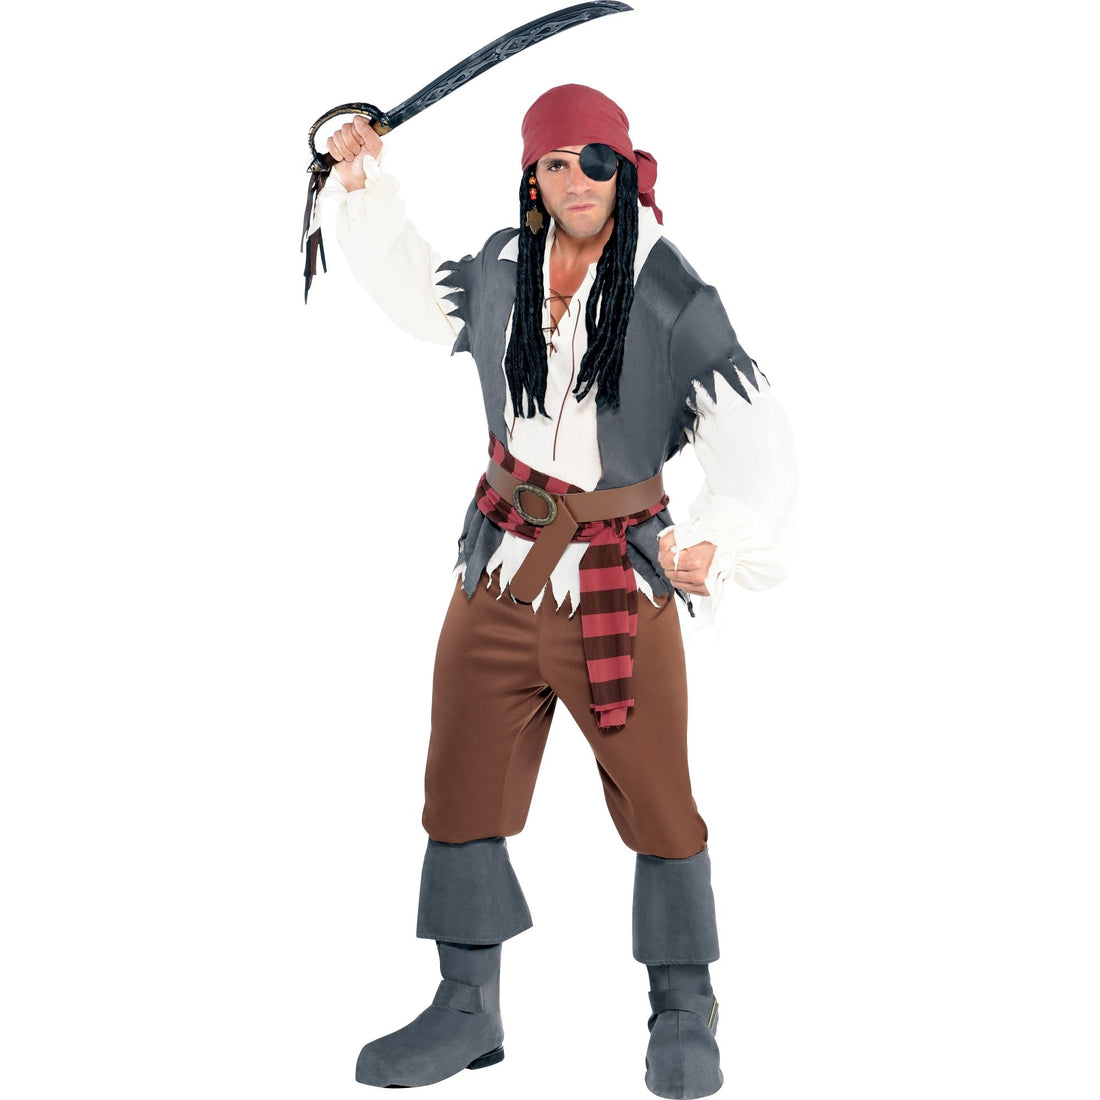 amscan 844171-55 Adults One-Eyed Pirate Costume with Headscarf and Bootcovers - Size Standard - 1 PC, Multi-Colour